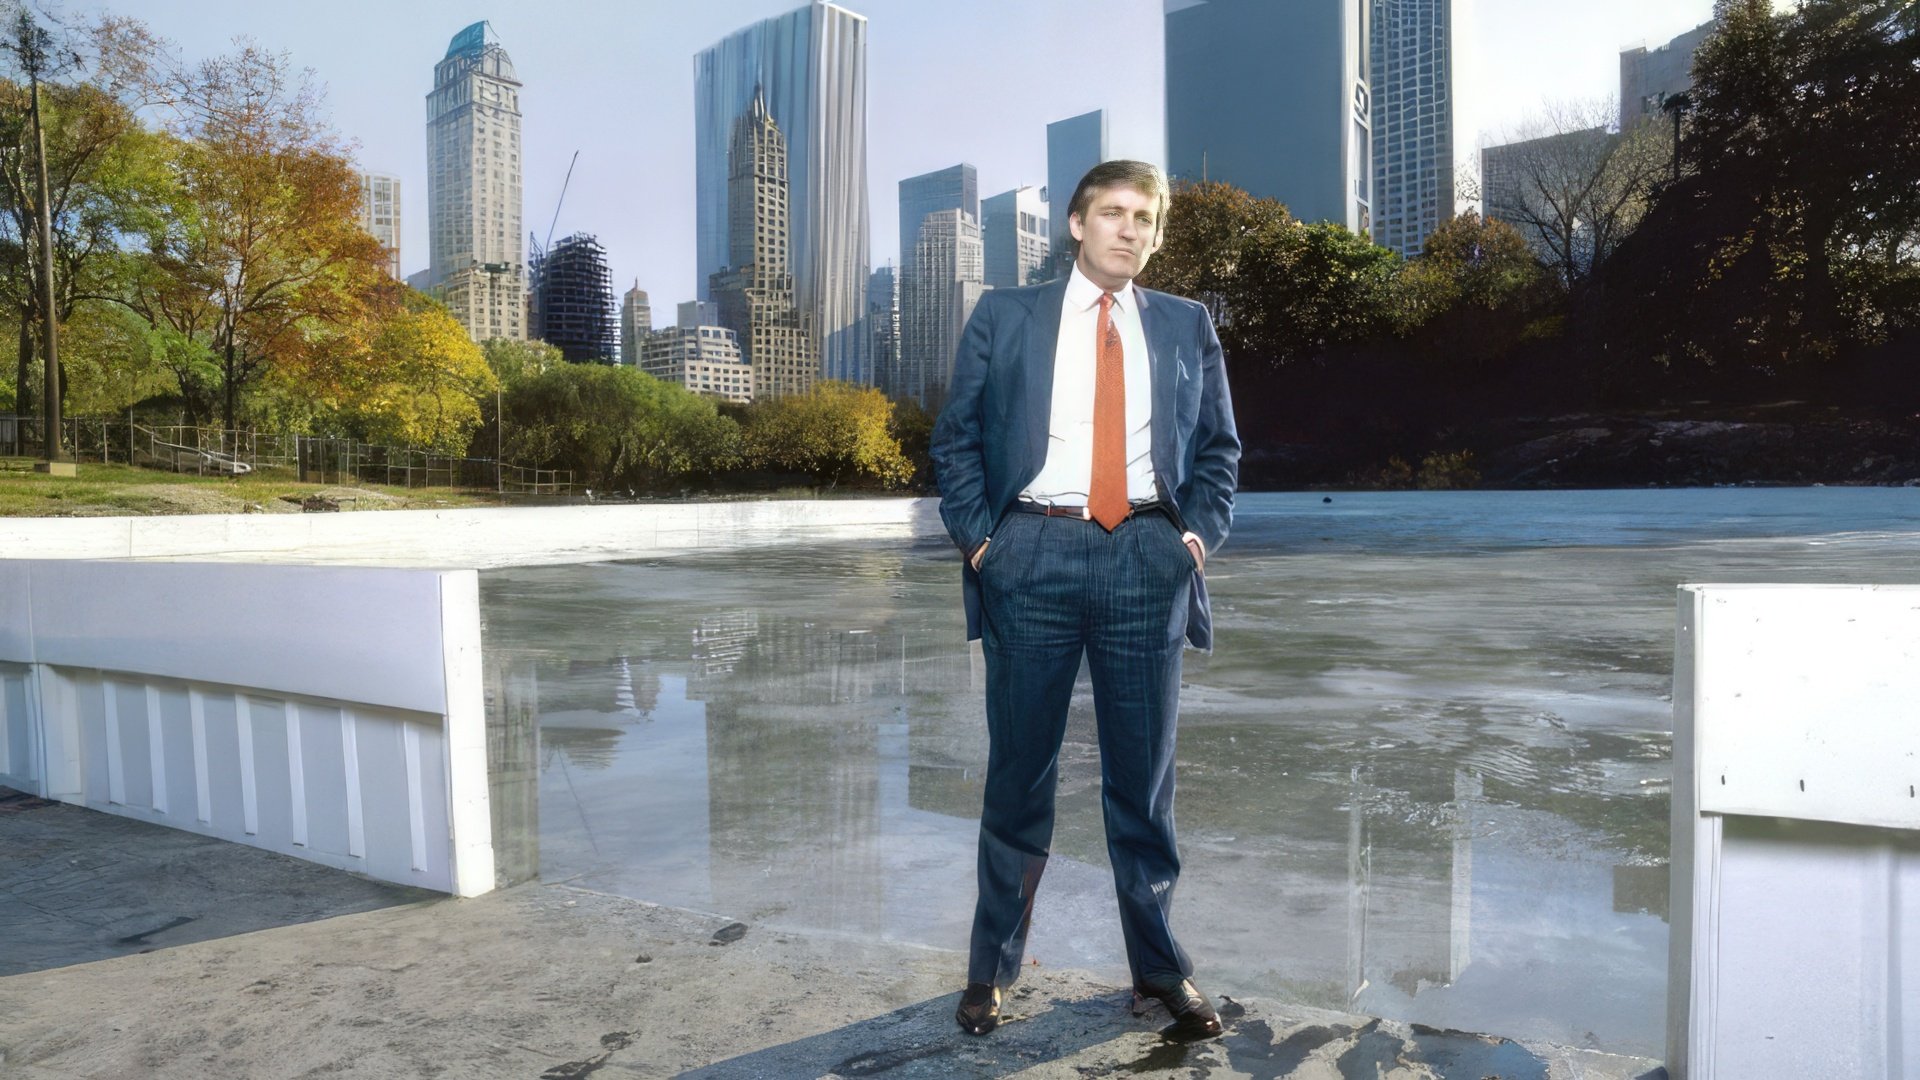 Trump has changed the face of Manhattan forever